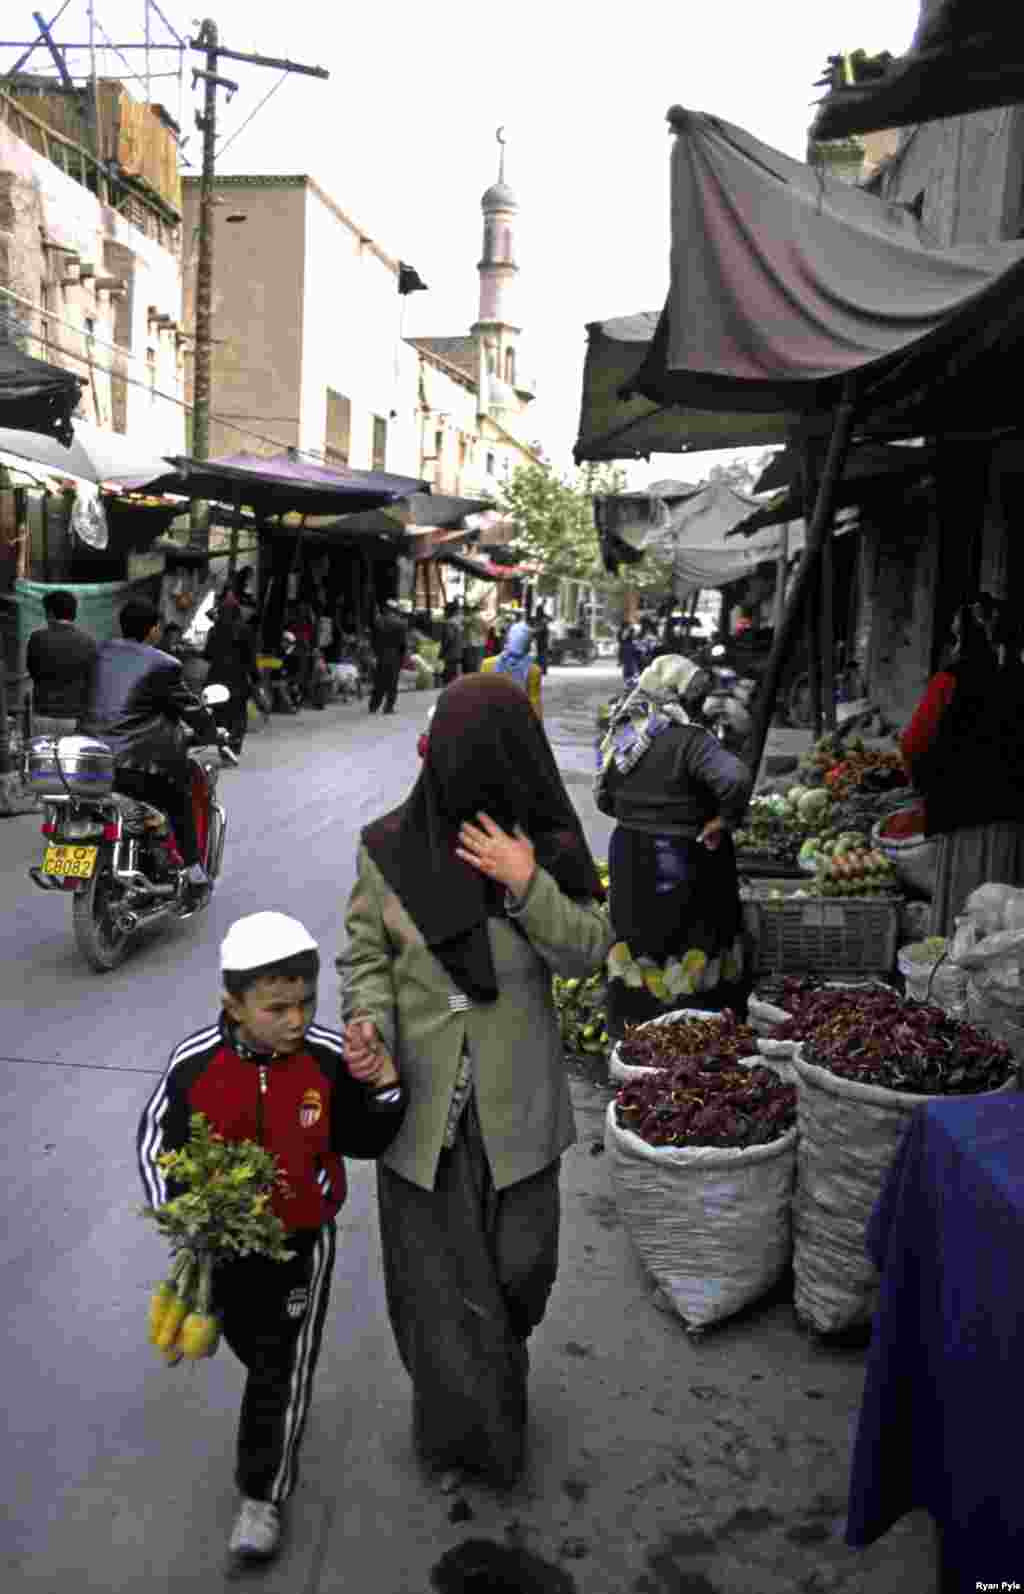 A woman, fully veiled, walks down a street with her son. - Street vendors in Kashgar sell hand-made candy, fresh mutton, or hand-sewn skull caps. Donkey-cart drivers navigate the narrow streets. 